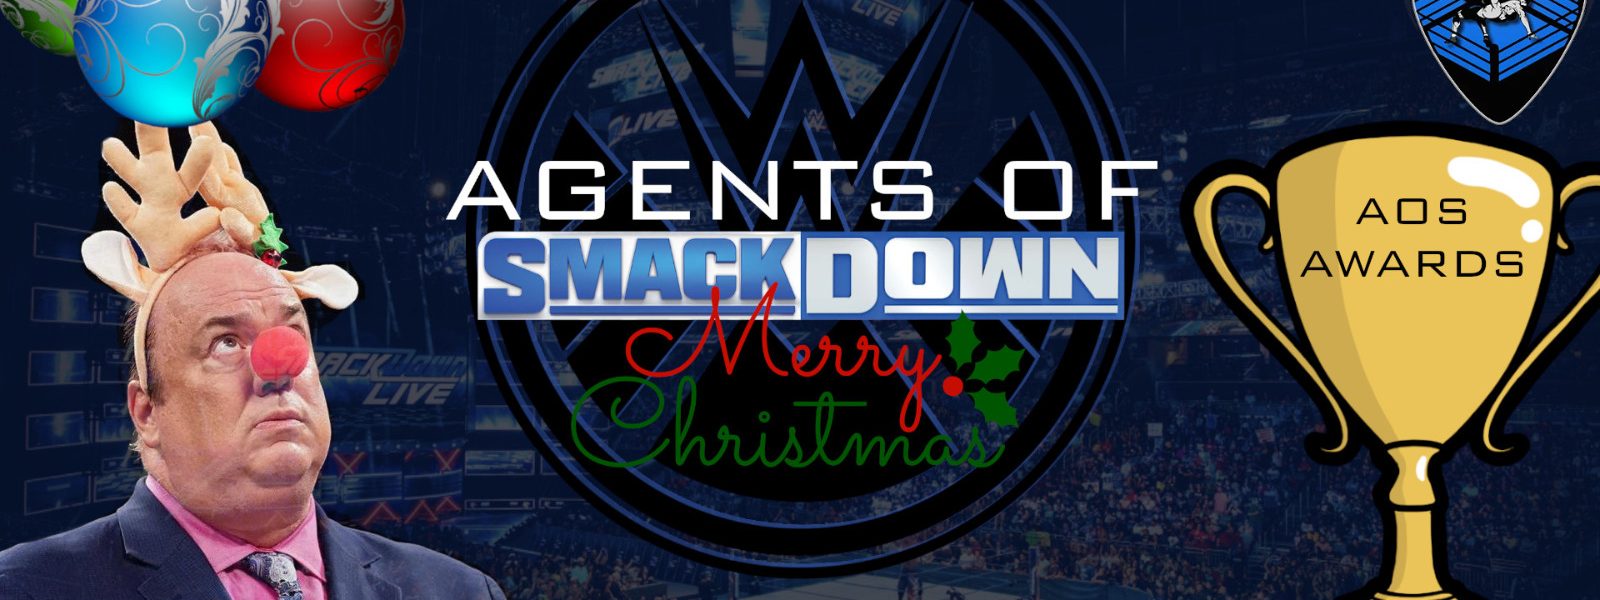 AGENTS AWARDS 2021 - Agents Of Smackdown EP.35